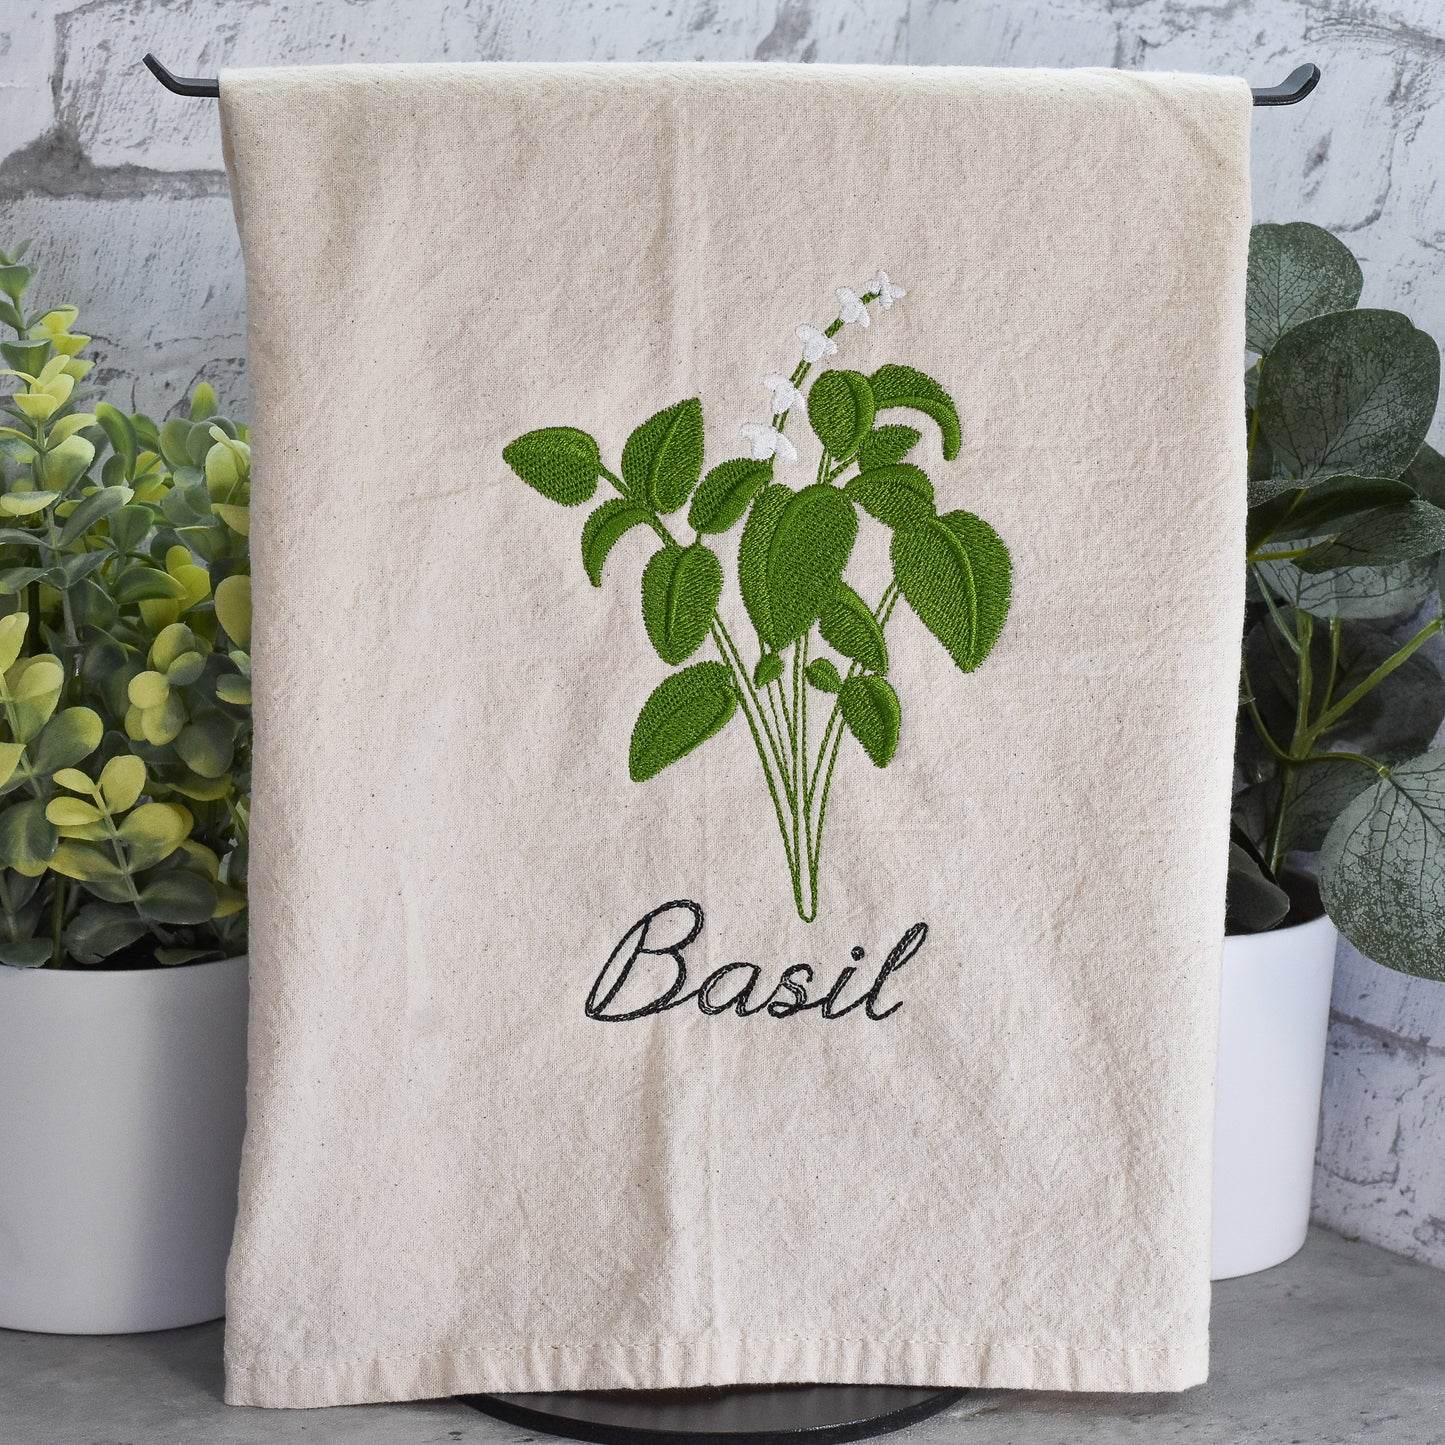 Basil Herb Collection - Embroidered Flour Sack Towel